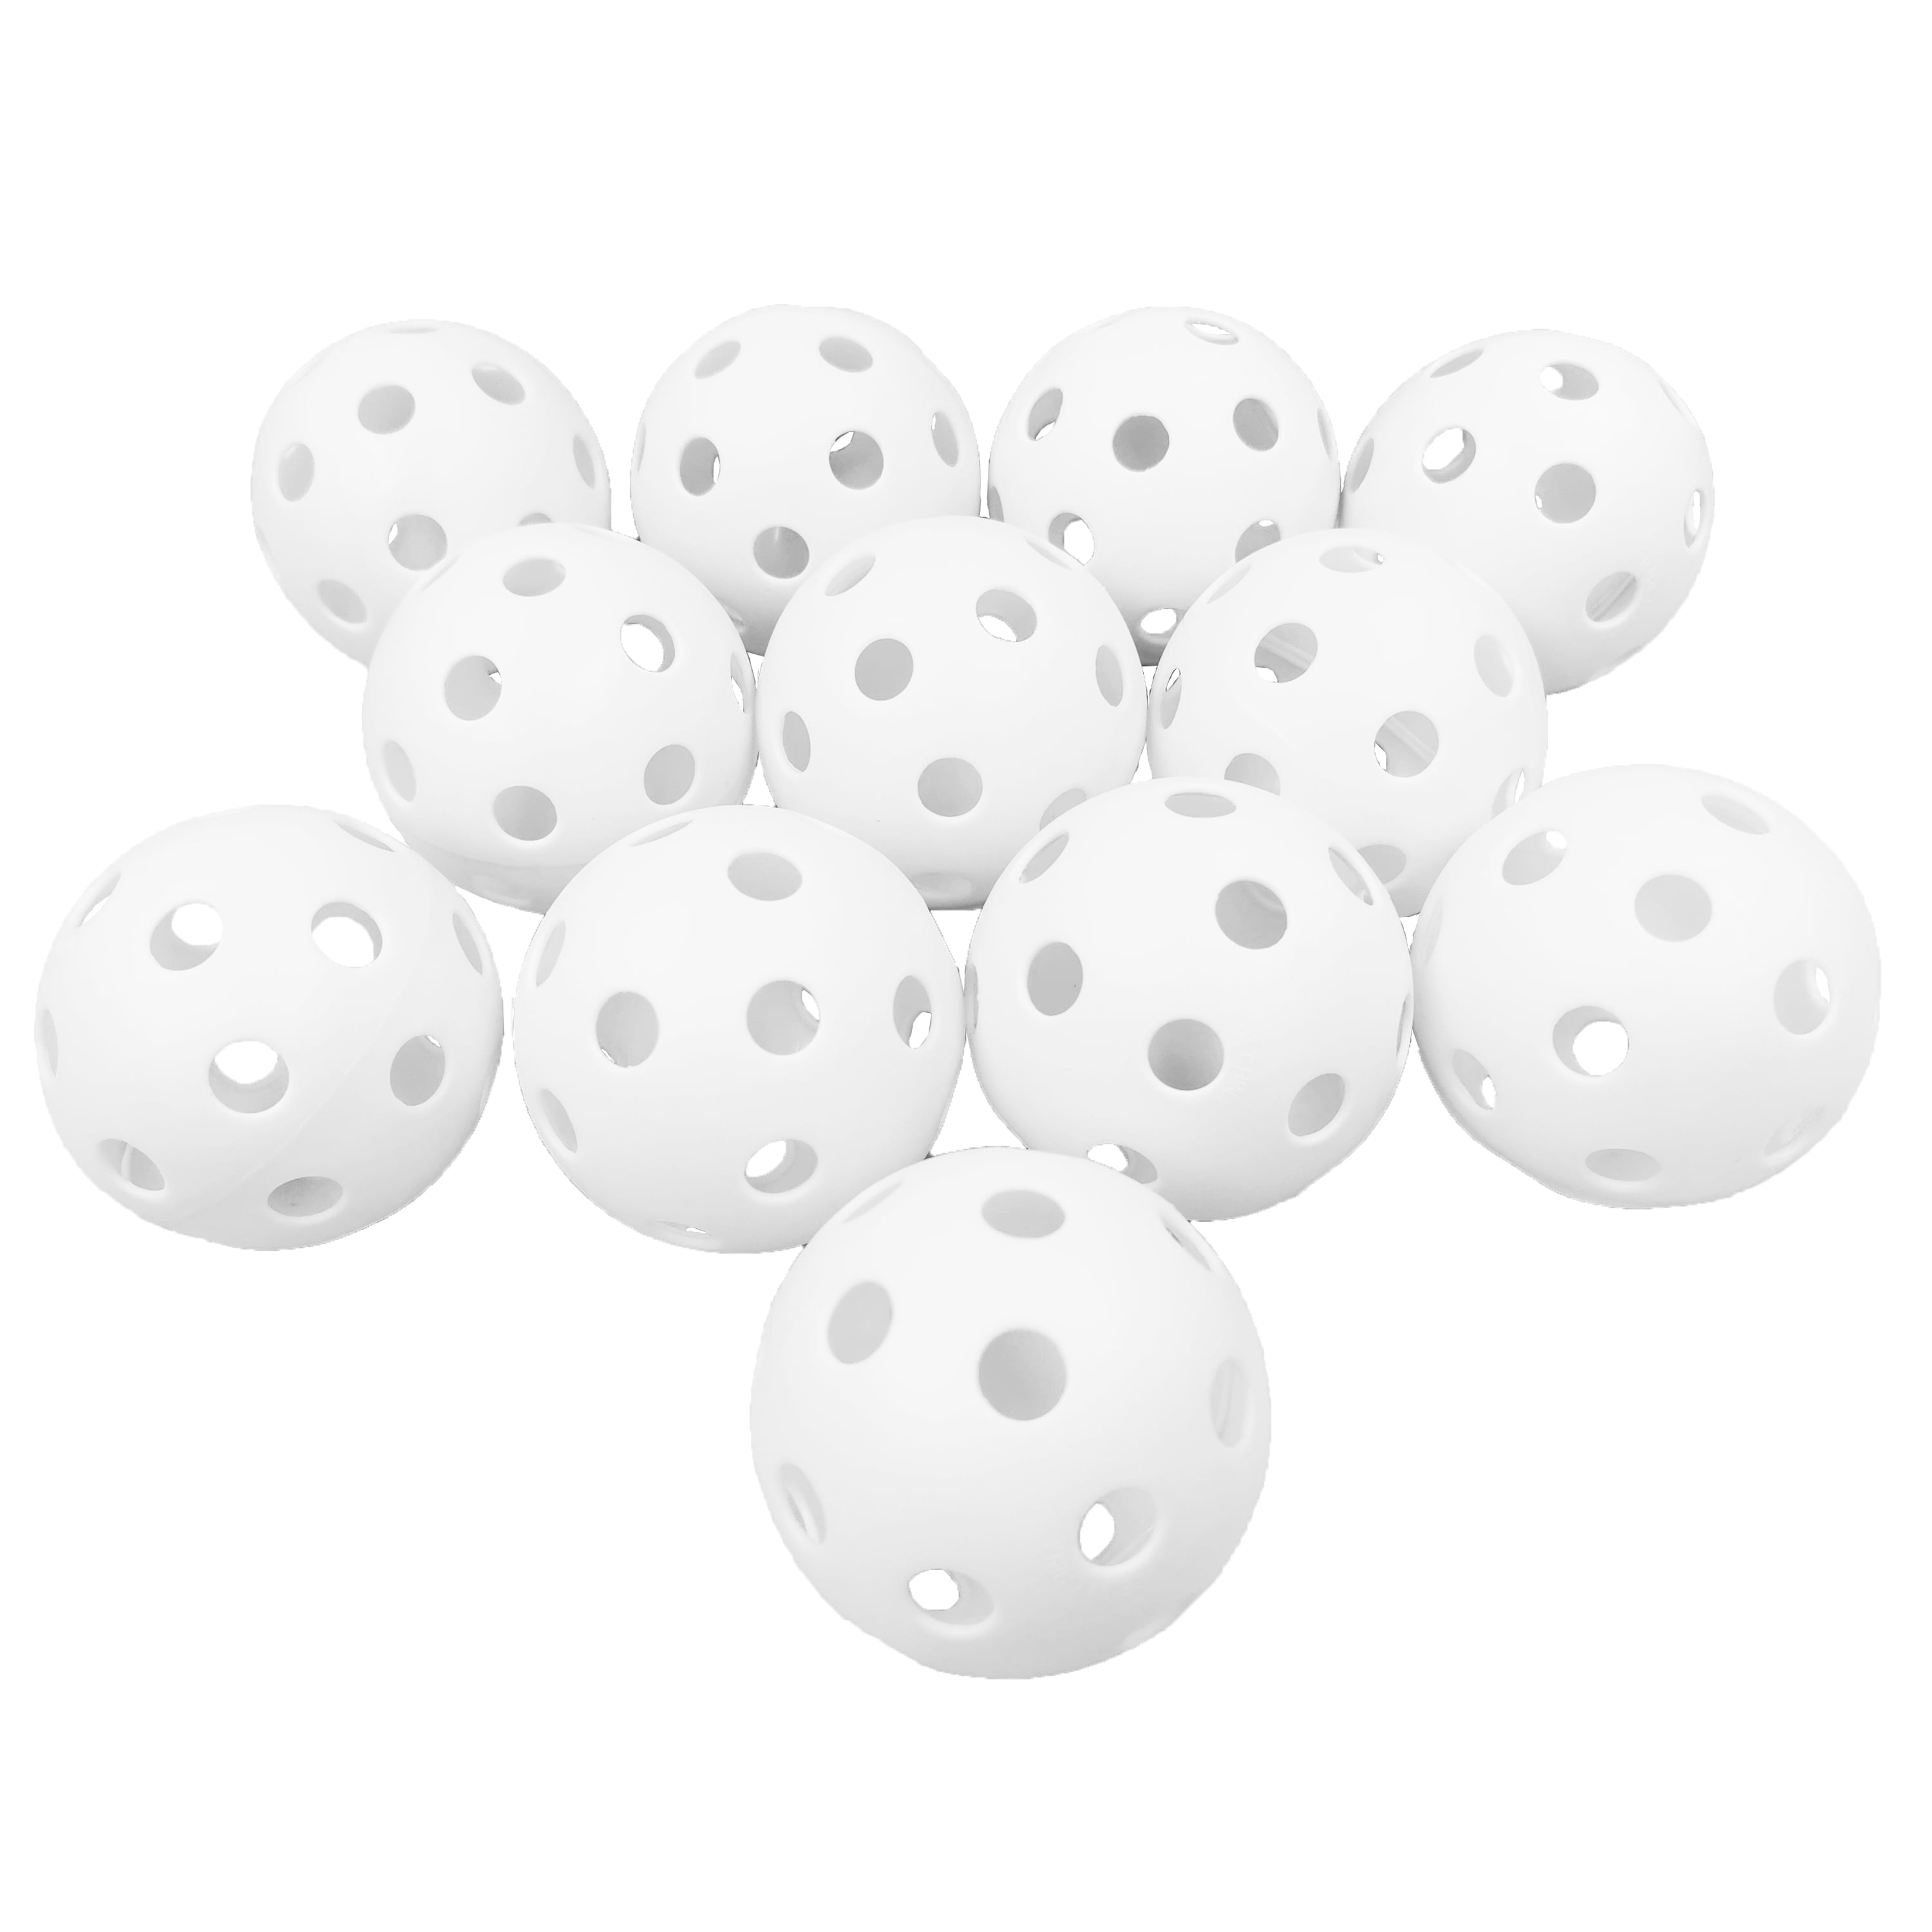 Athletic Specialties Perforated Baseballs Box of 100 White